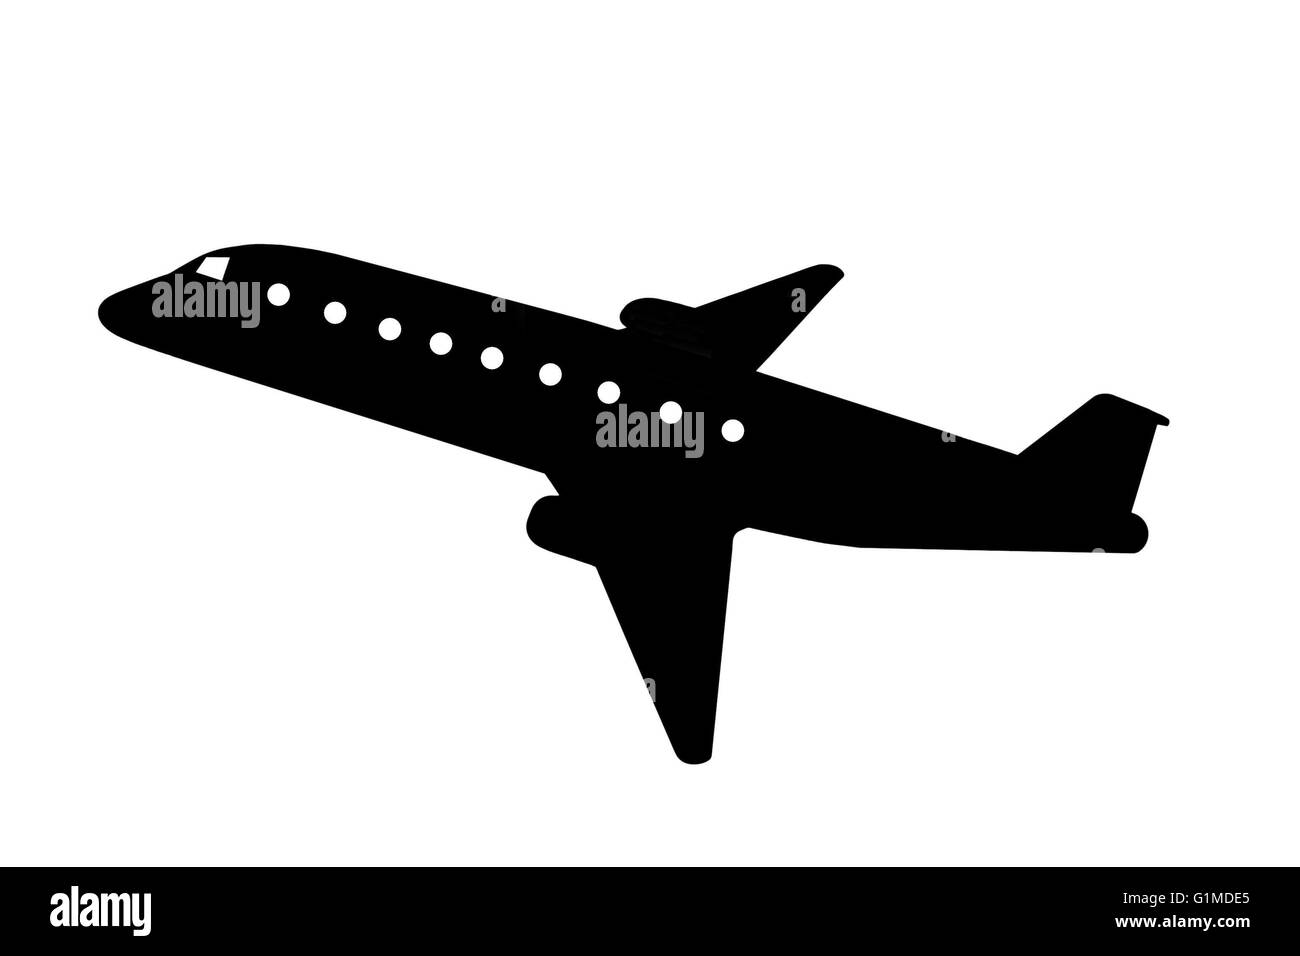 airport or low flying aircraft silhouette in black on white for signs Stock Photo